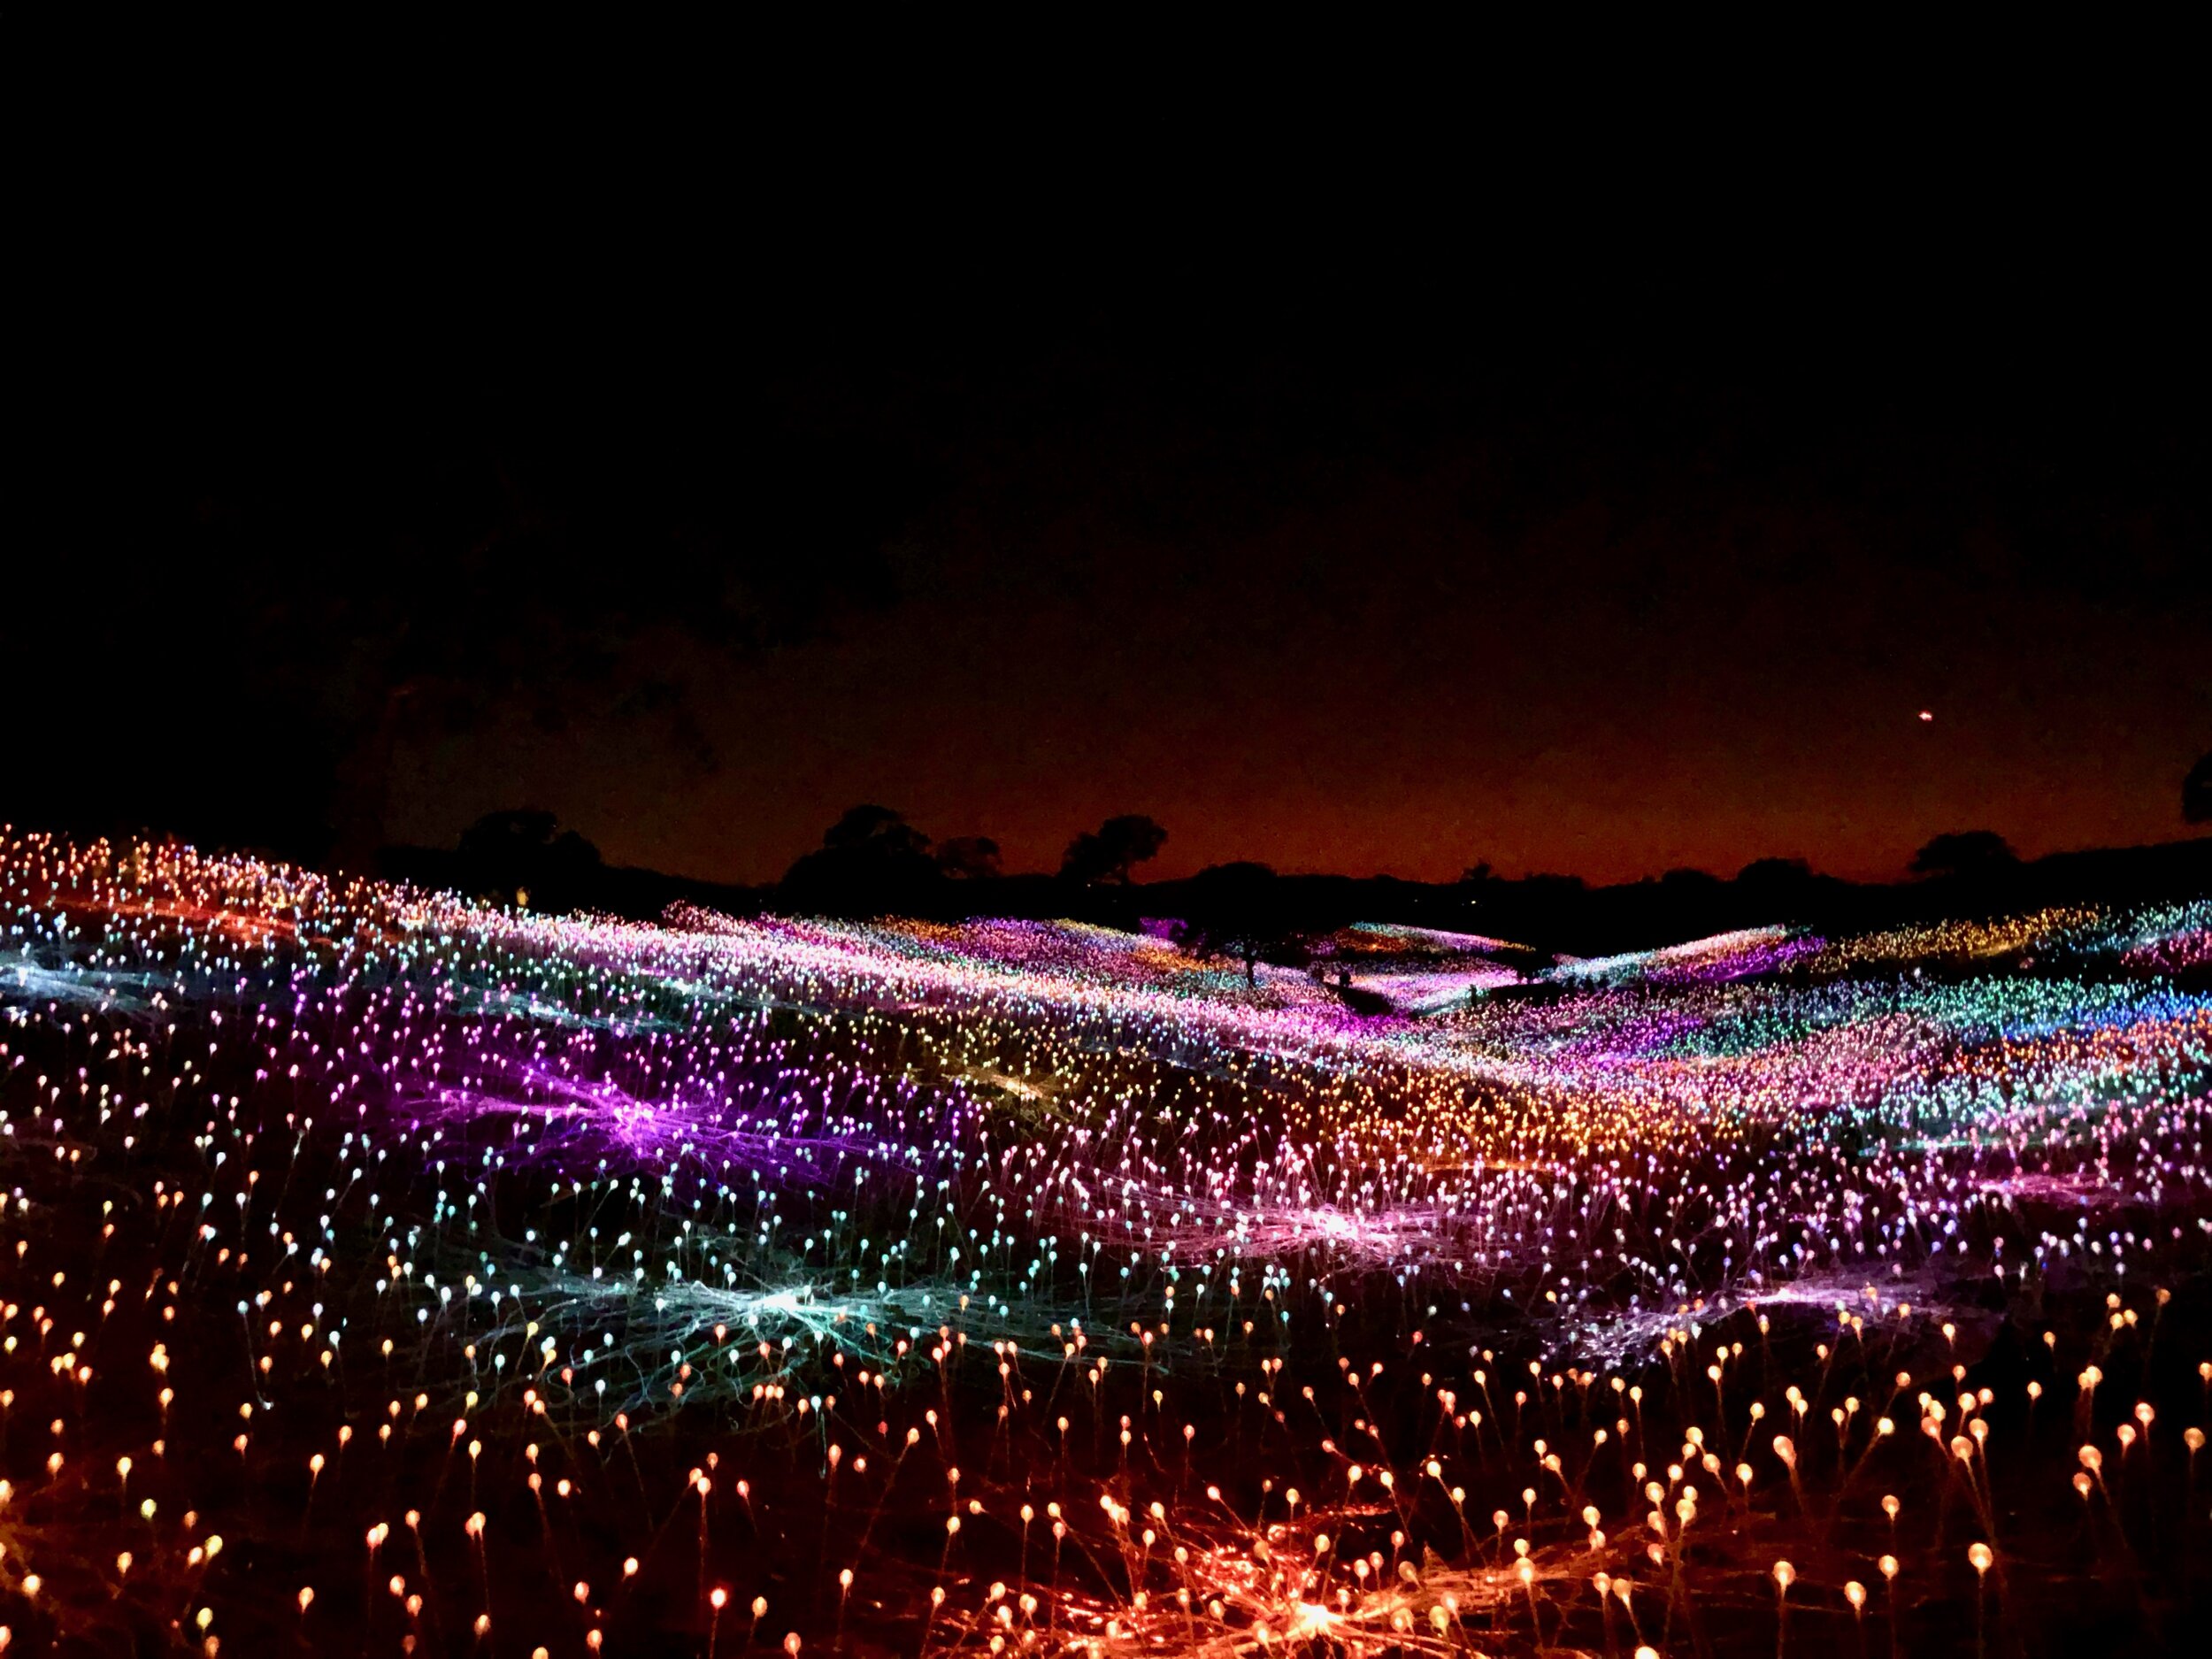 “A Field of Light” by Bruce Munro at Sensorio